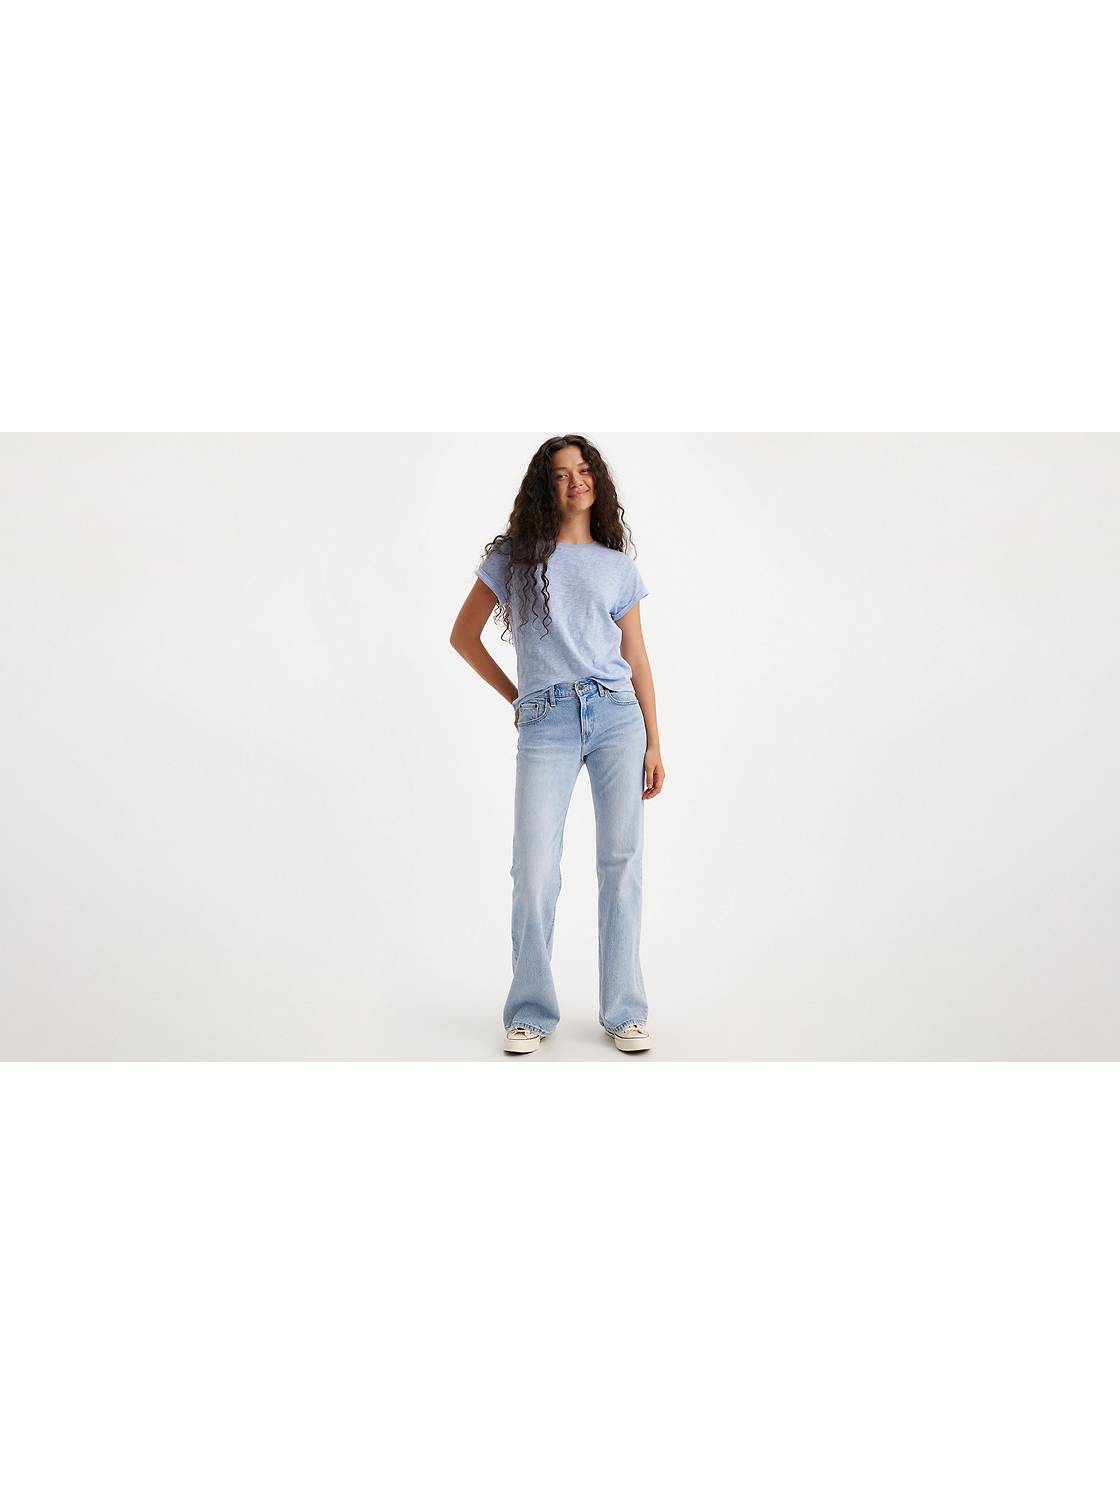 Jeans for Women Pants for Women Women's Jeans High Waist Stacked Jeans  Women's Pants (Color : Blue, Size : Tall XS) : : Clothing, Shoes &  Accessories